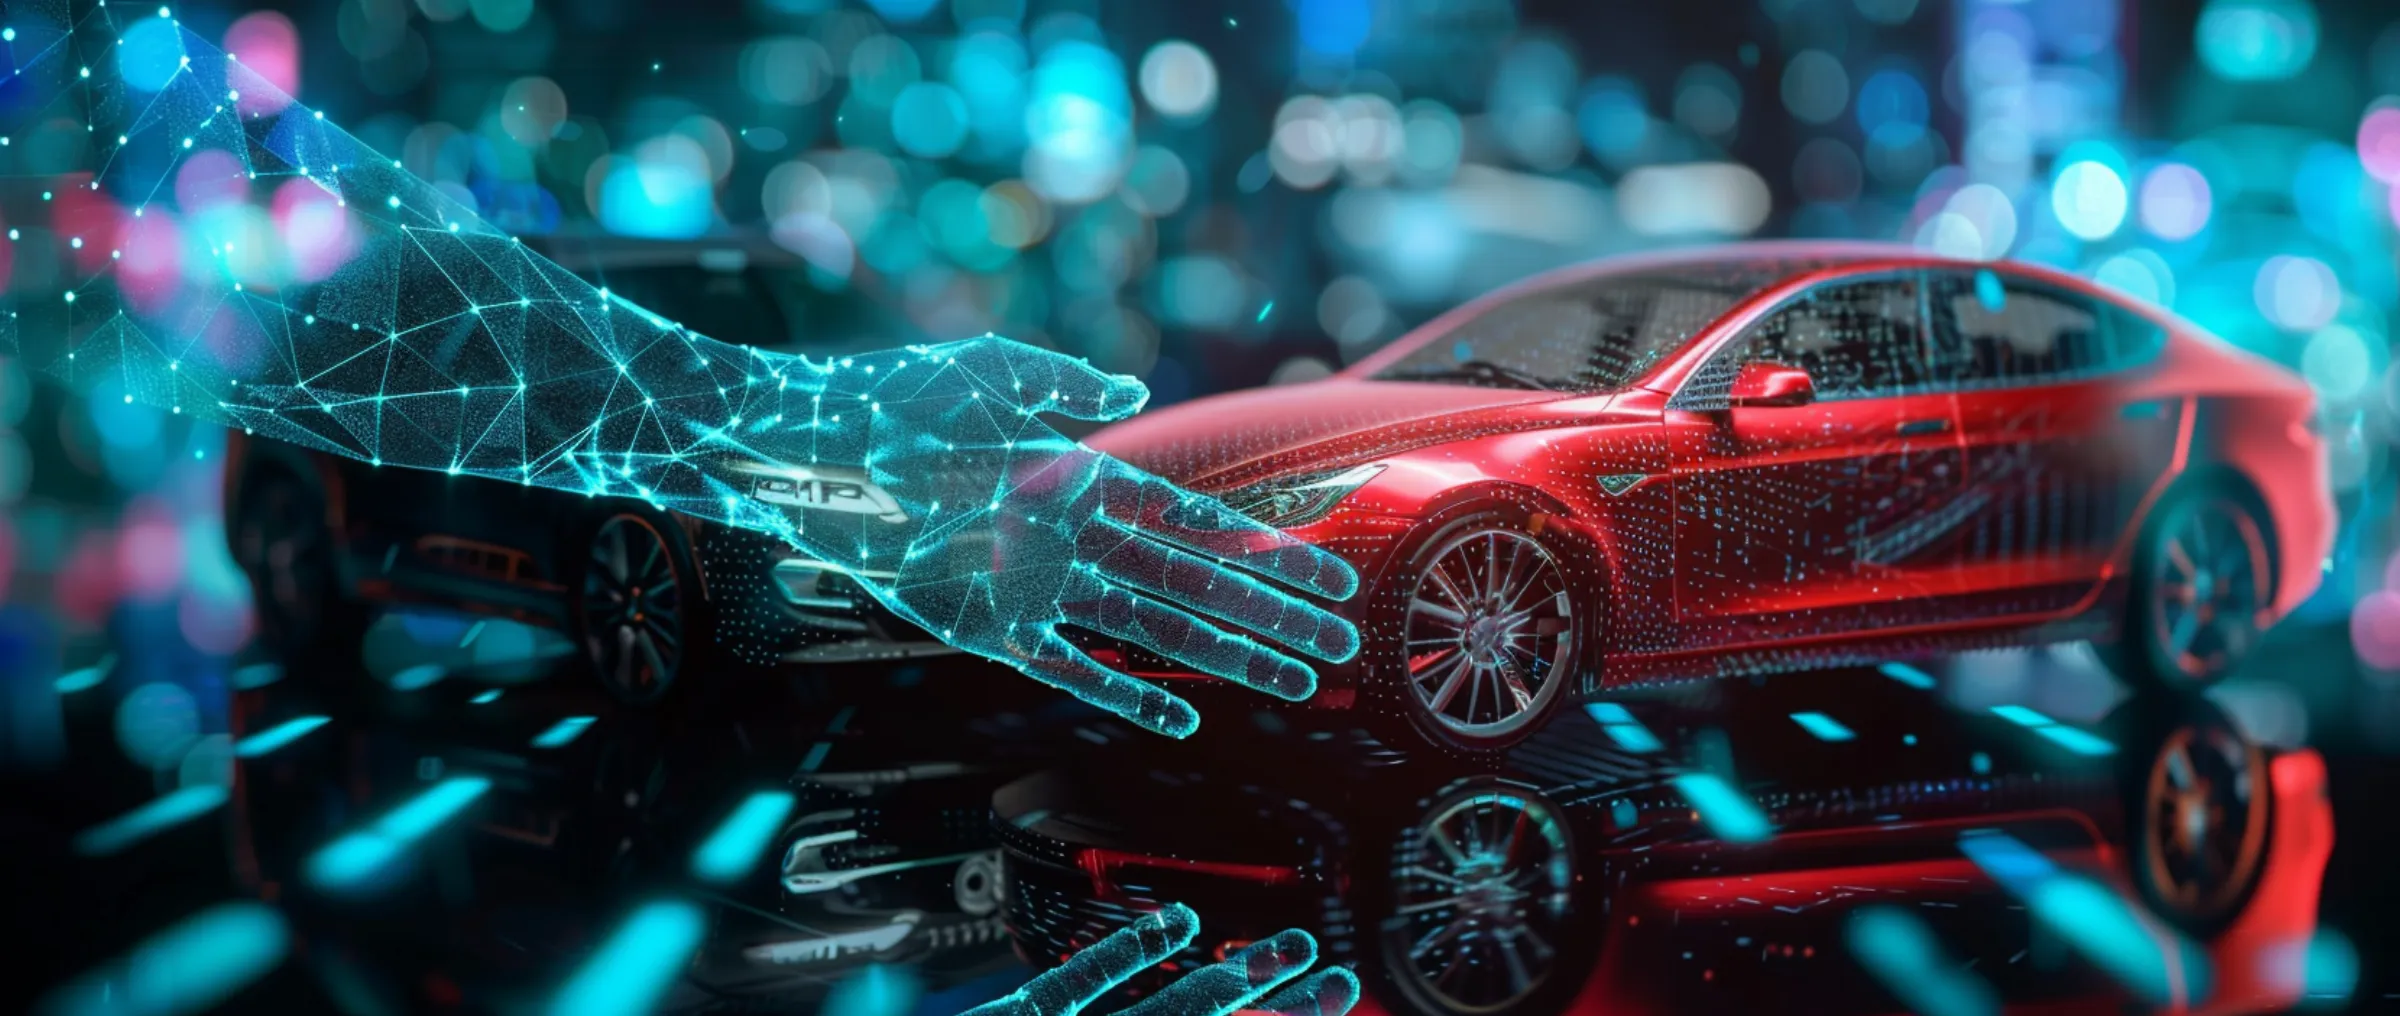 In China, smart contracts are used for car payments